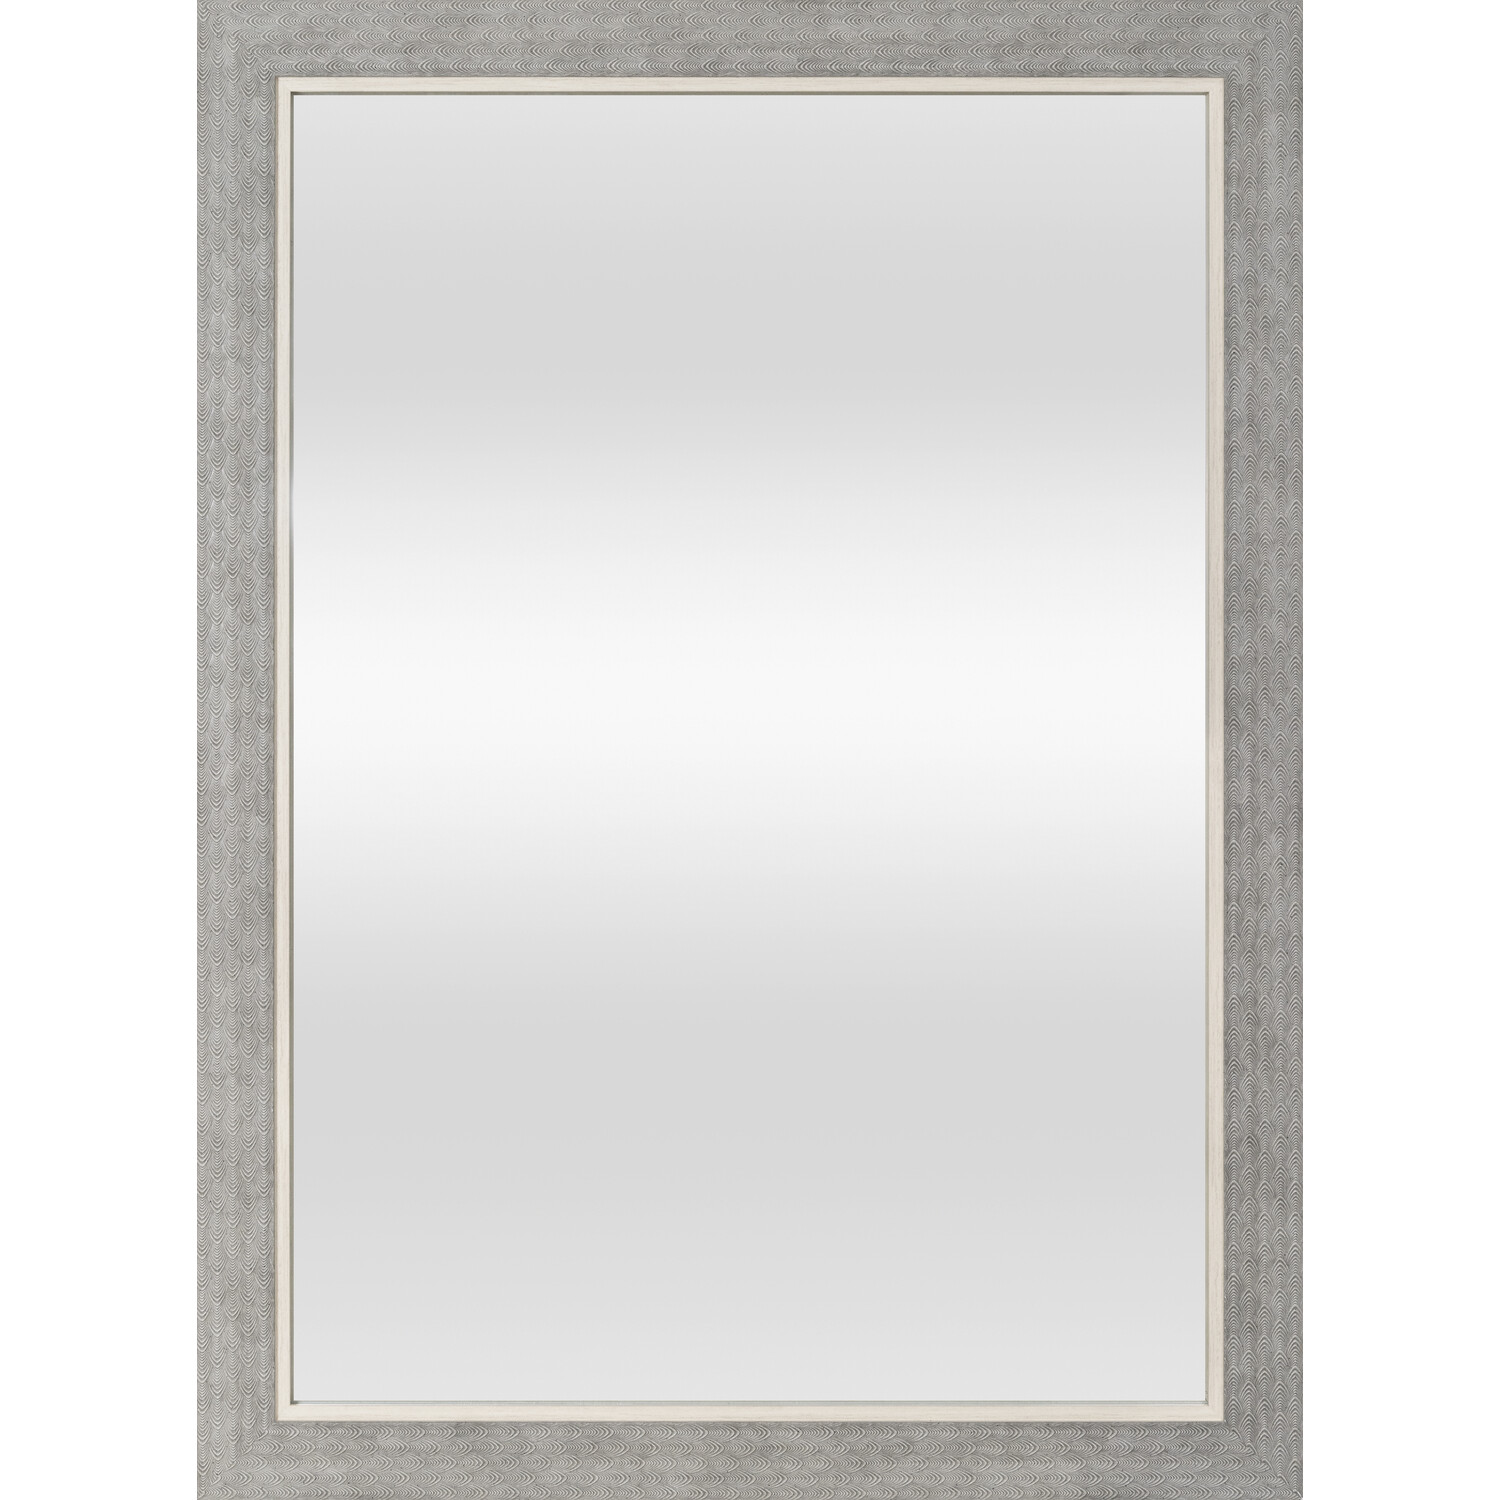 Talia Etched Effect Mirror - Grey Image 1